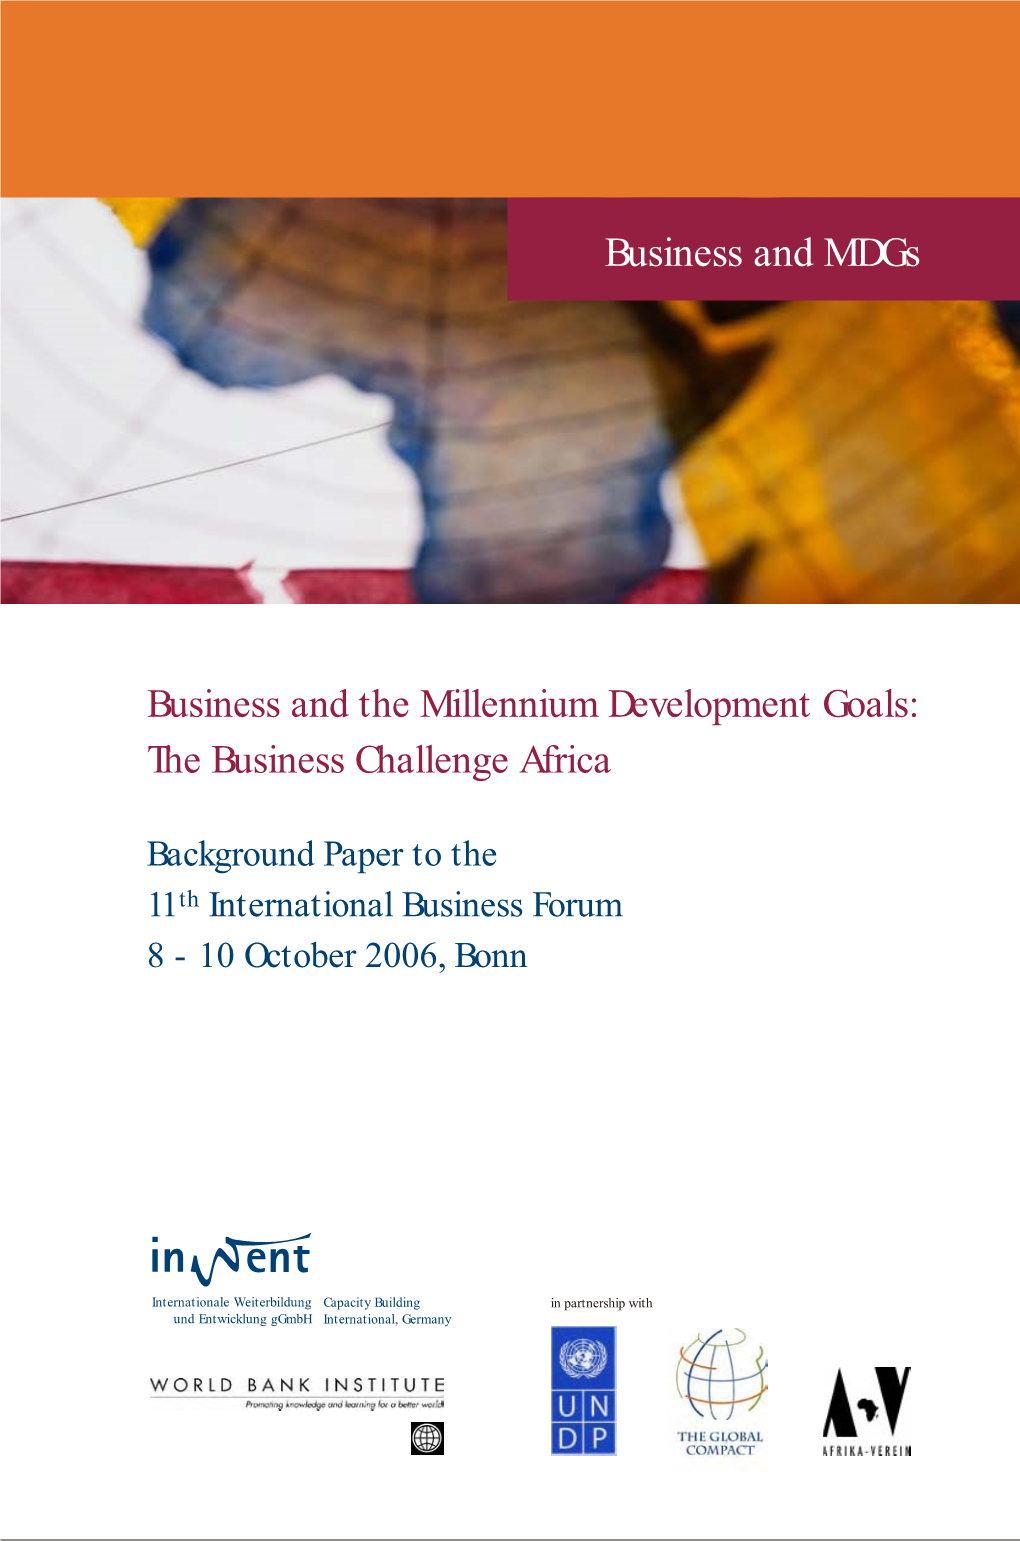 Business and Mdgs